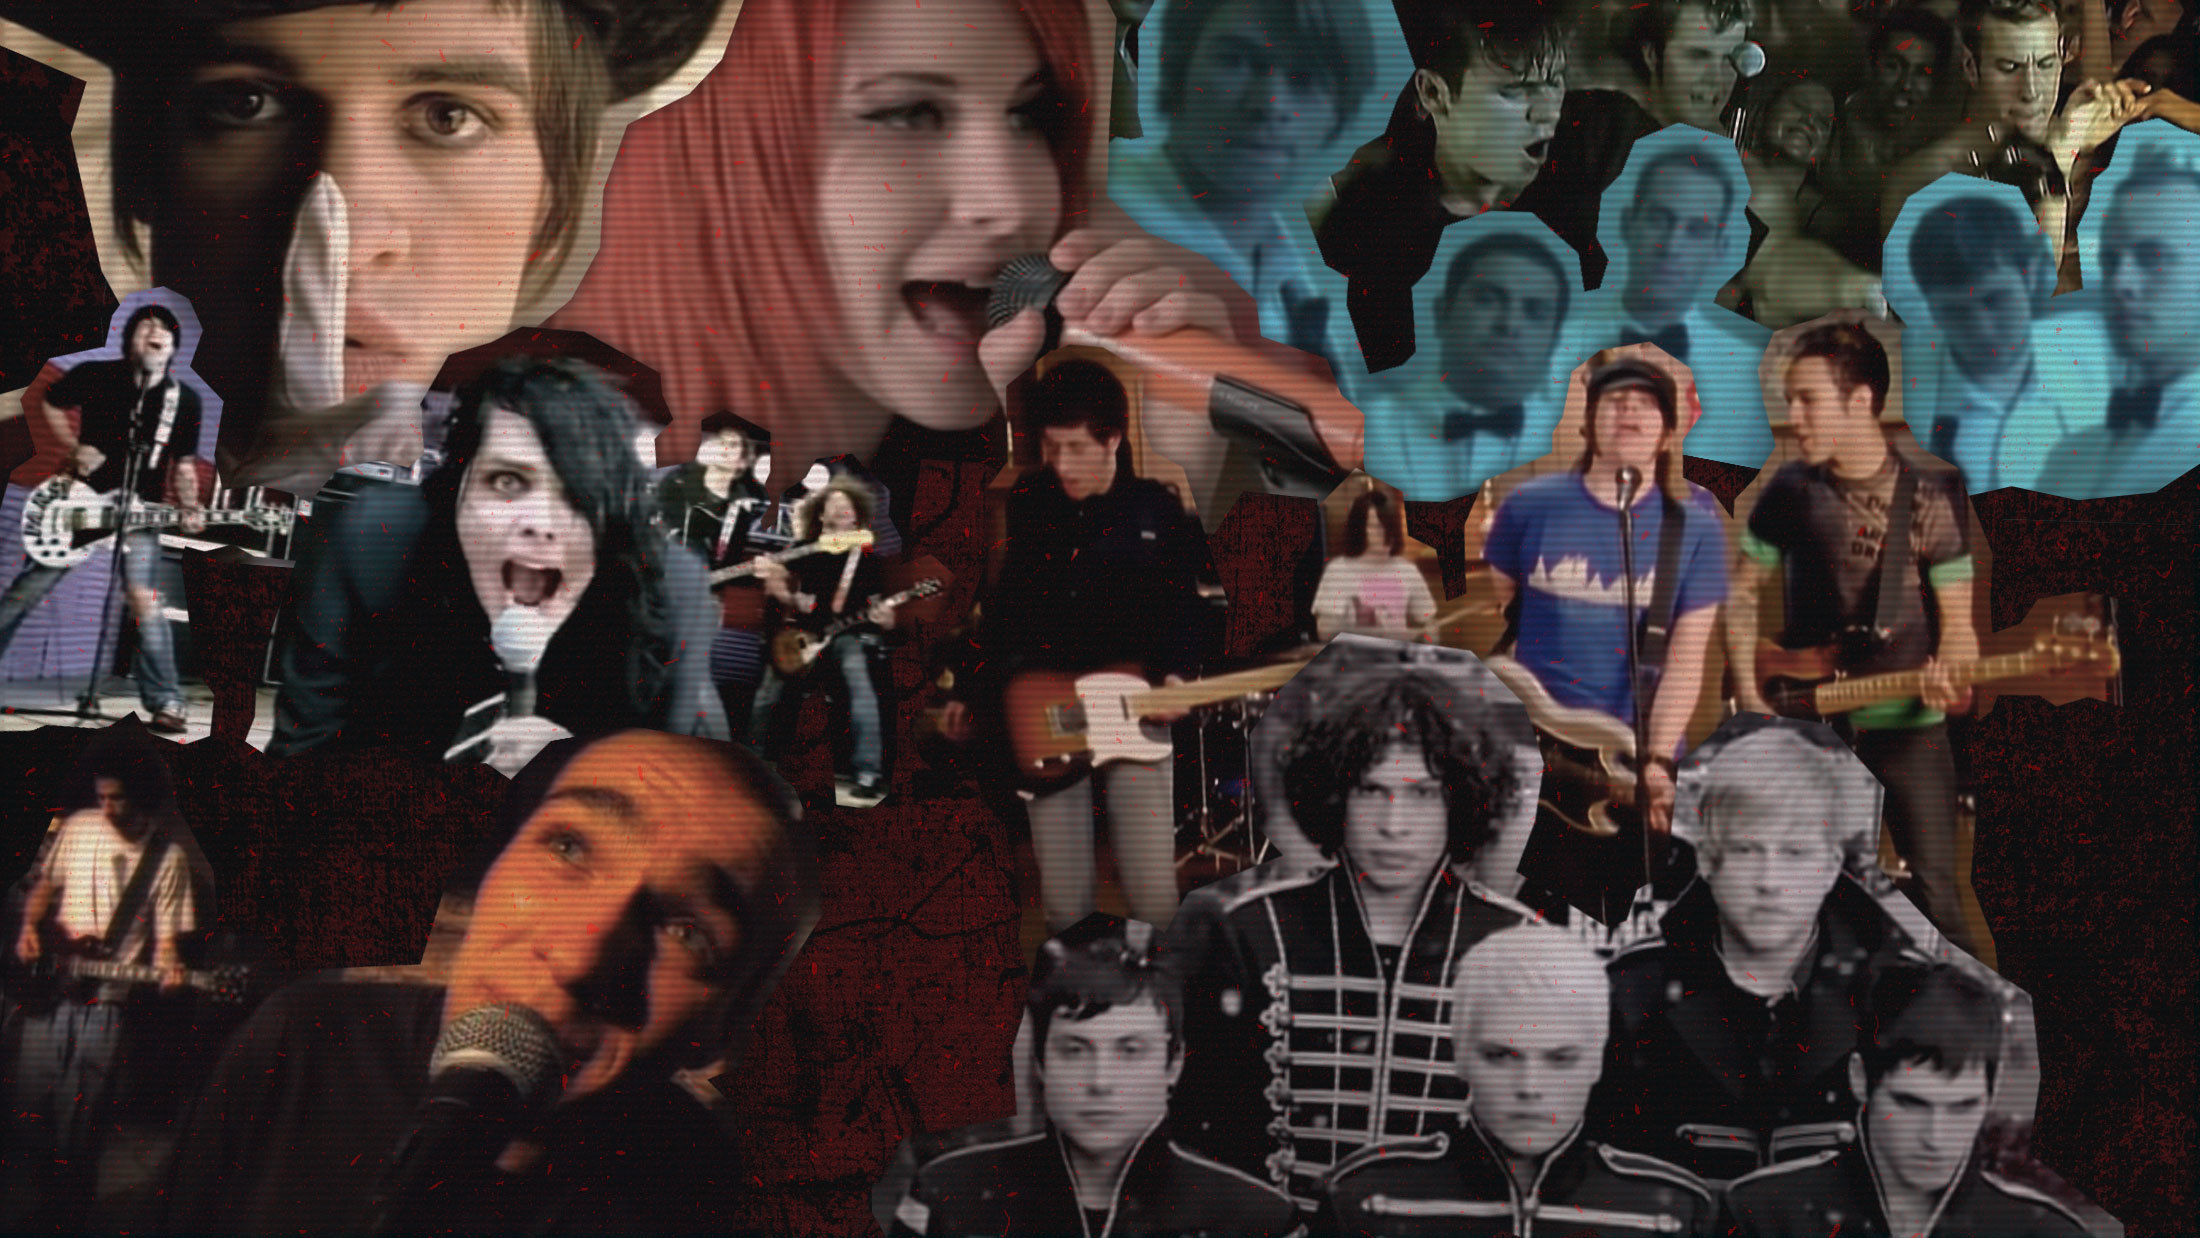 Best Emo Songs of All Time, From My Chemical Romance to Paramore